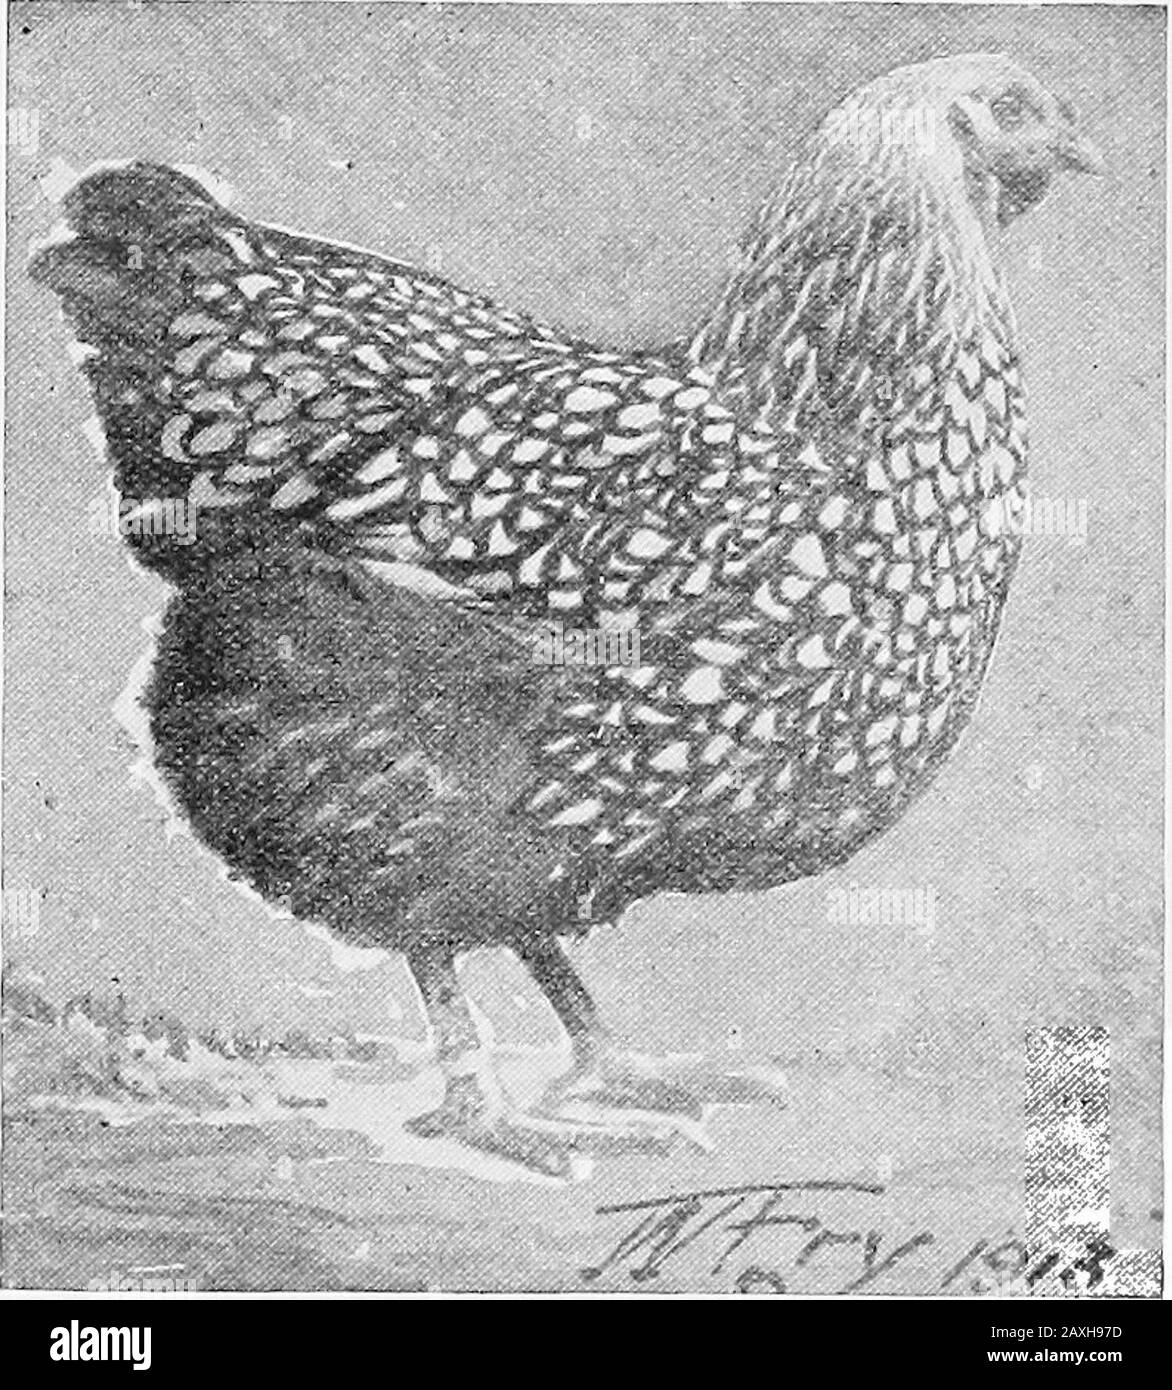 Poultry culture sanitation and hygiene . A Silver Wyandotte pullet. feather early, grow rapidly, and on proper feed are plump atseven or eight weeks old and ready for the table. The second variety to be developed was the Golden, whichMr. McKeen, of Wisconsin, produced by crossing the RoseComb Brown Leghorn on the Pea Comb Partridge Cochinand Buff-colored females. This progeny was crossed withBuff Cochins and Golden Sebrights. In the Golden Wyandotte a golden bay is substituted for 50 POULTRY CULTURE the white of the silver, otherwise they are the same in confor-mation and feather pattern. The Stock Photo